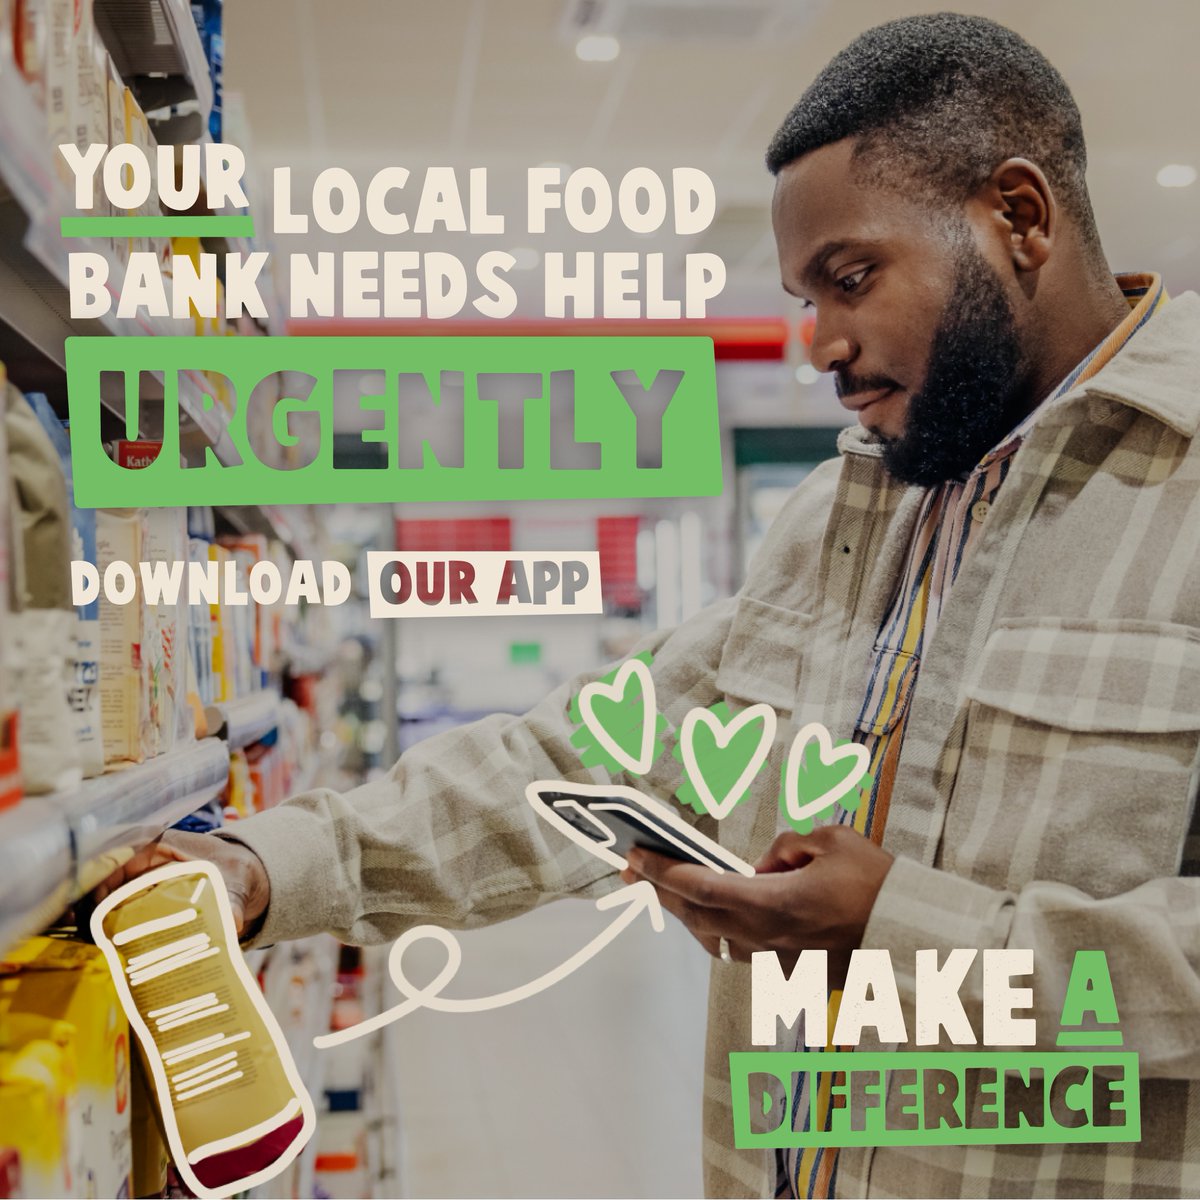 Food poverty is a frightening reality for many people in this country and food banks are struggling to cope. Now more than ever, they urgently need our donations to help thousands of adults and children with emergency food parcels. Download our app today and make a difference.